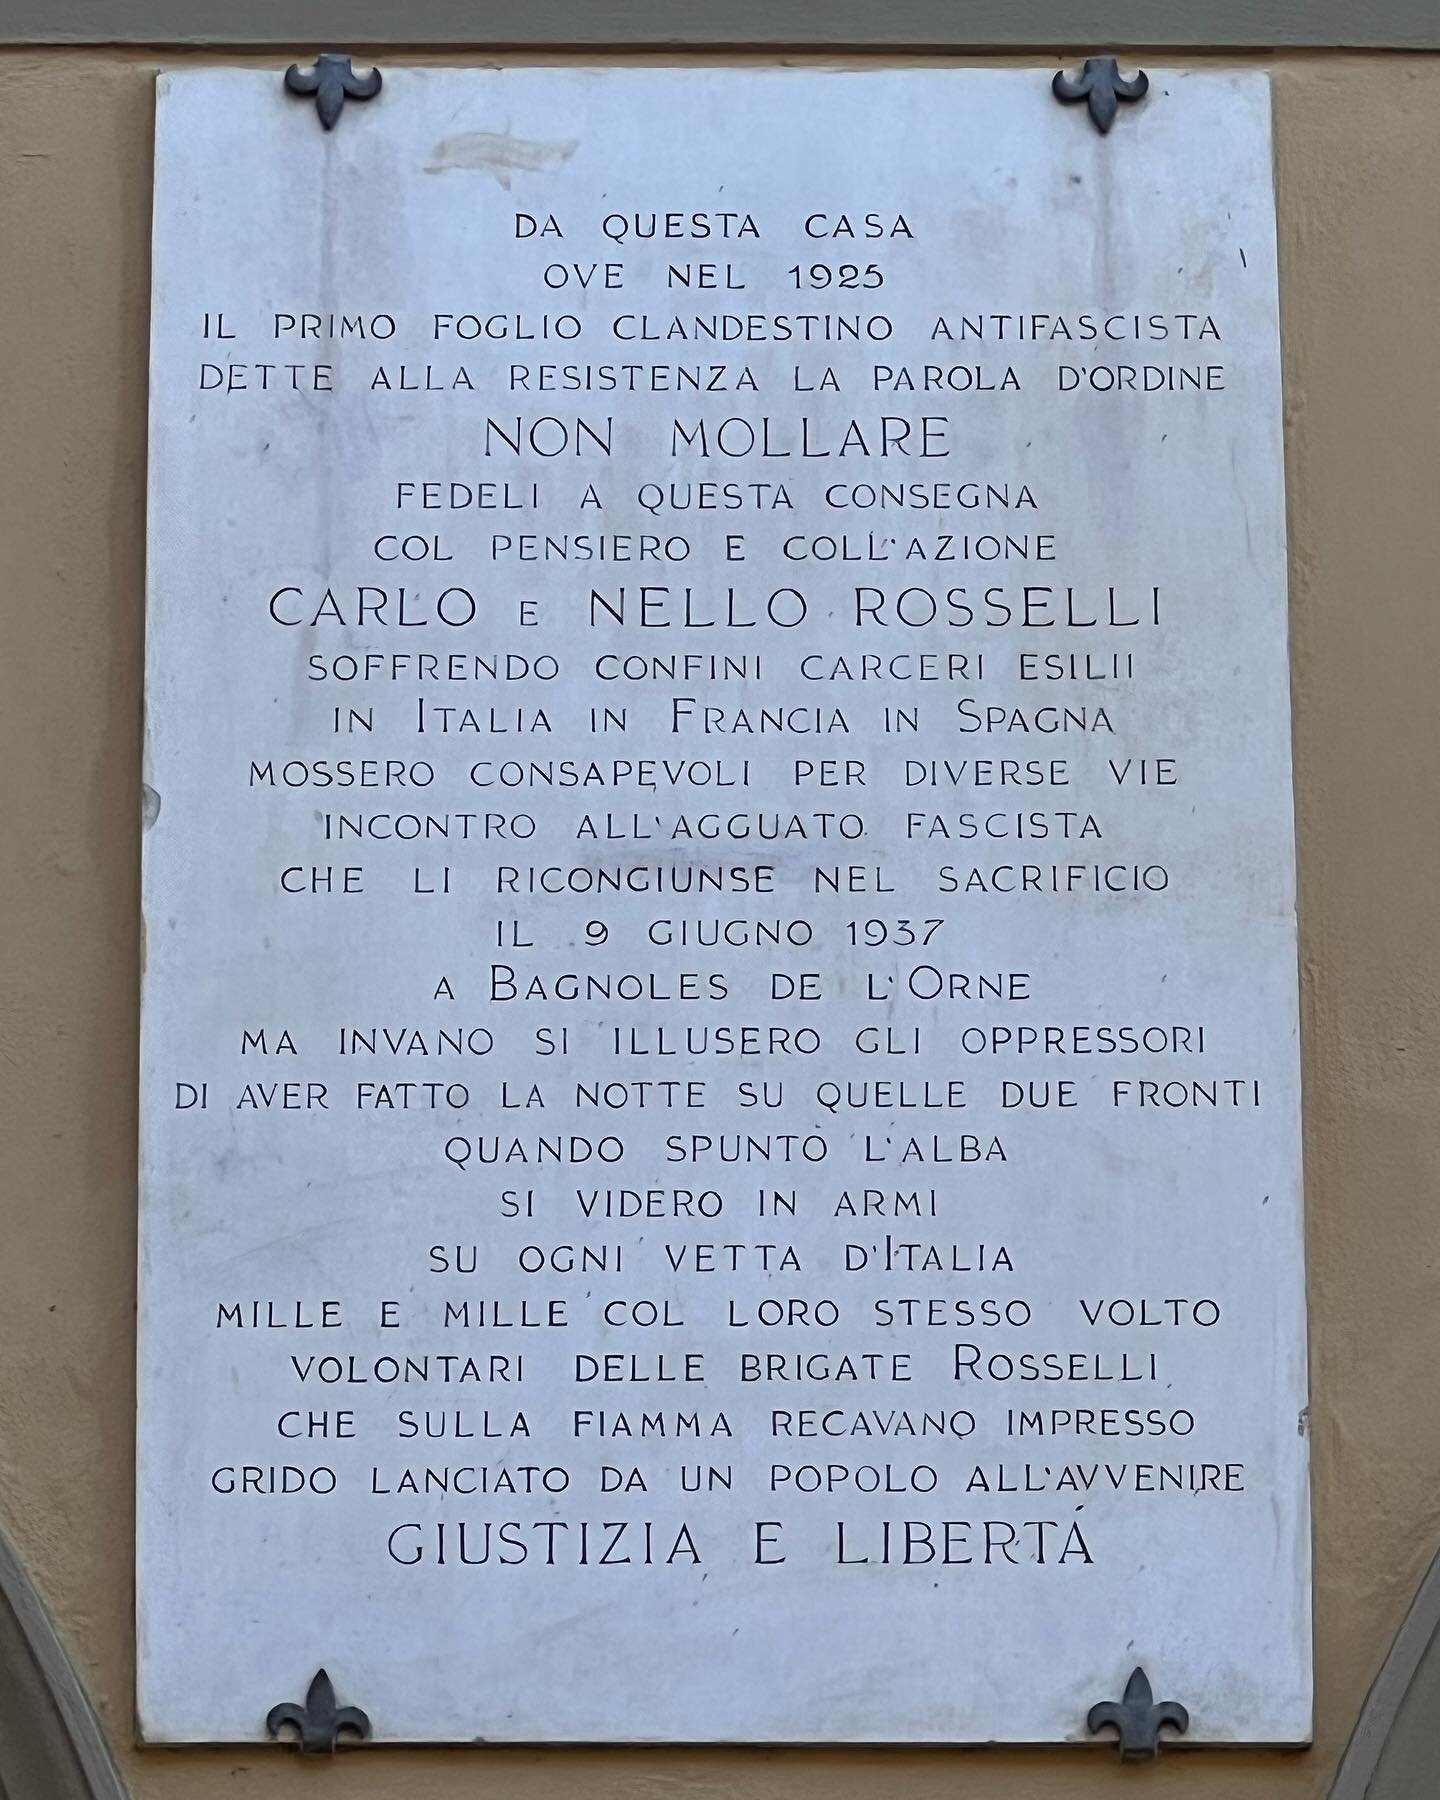 Pilgrimage to the Casa Rosselli. I would like to translate this plaque, whose eloquence, depth of thought, and memory of Fascism are of a lost era. Also: there is literally no mention of Amelia Rosselli, their mother, a distinguished author and femin